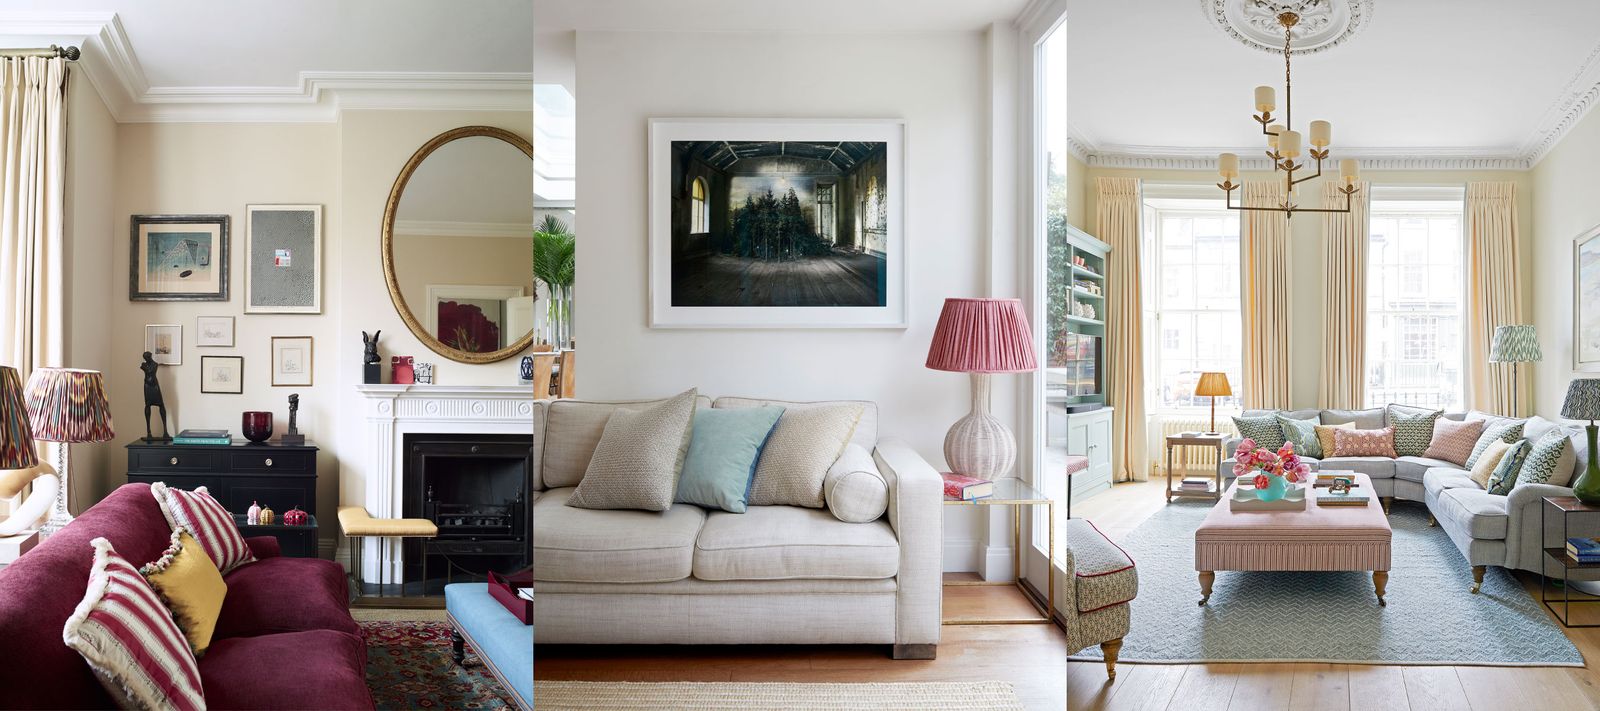 Should a sofa be lighter or darker than walls? We ask the designers in ...